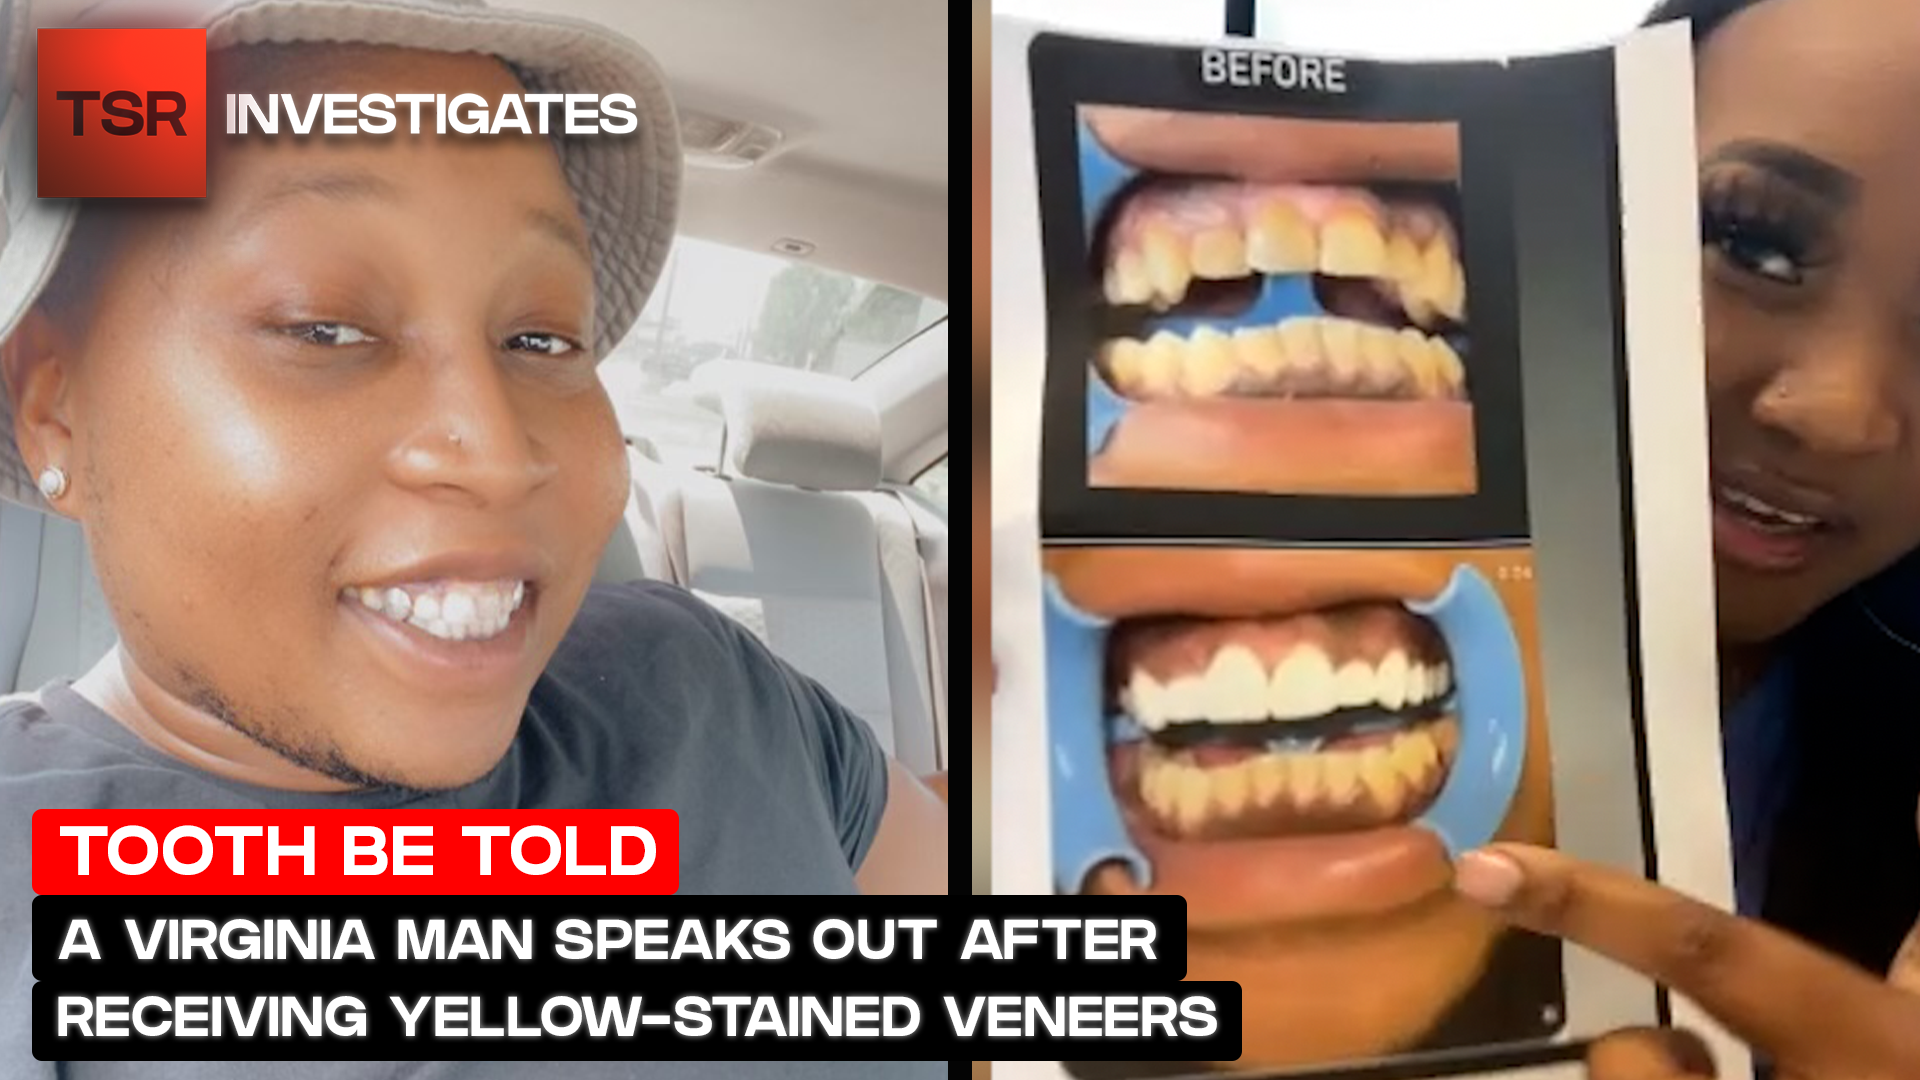 Virginia Rapper Receives Yellow-Stained Veneers, But Was He Really Scammed? #TSRInvestigates